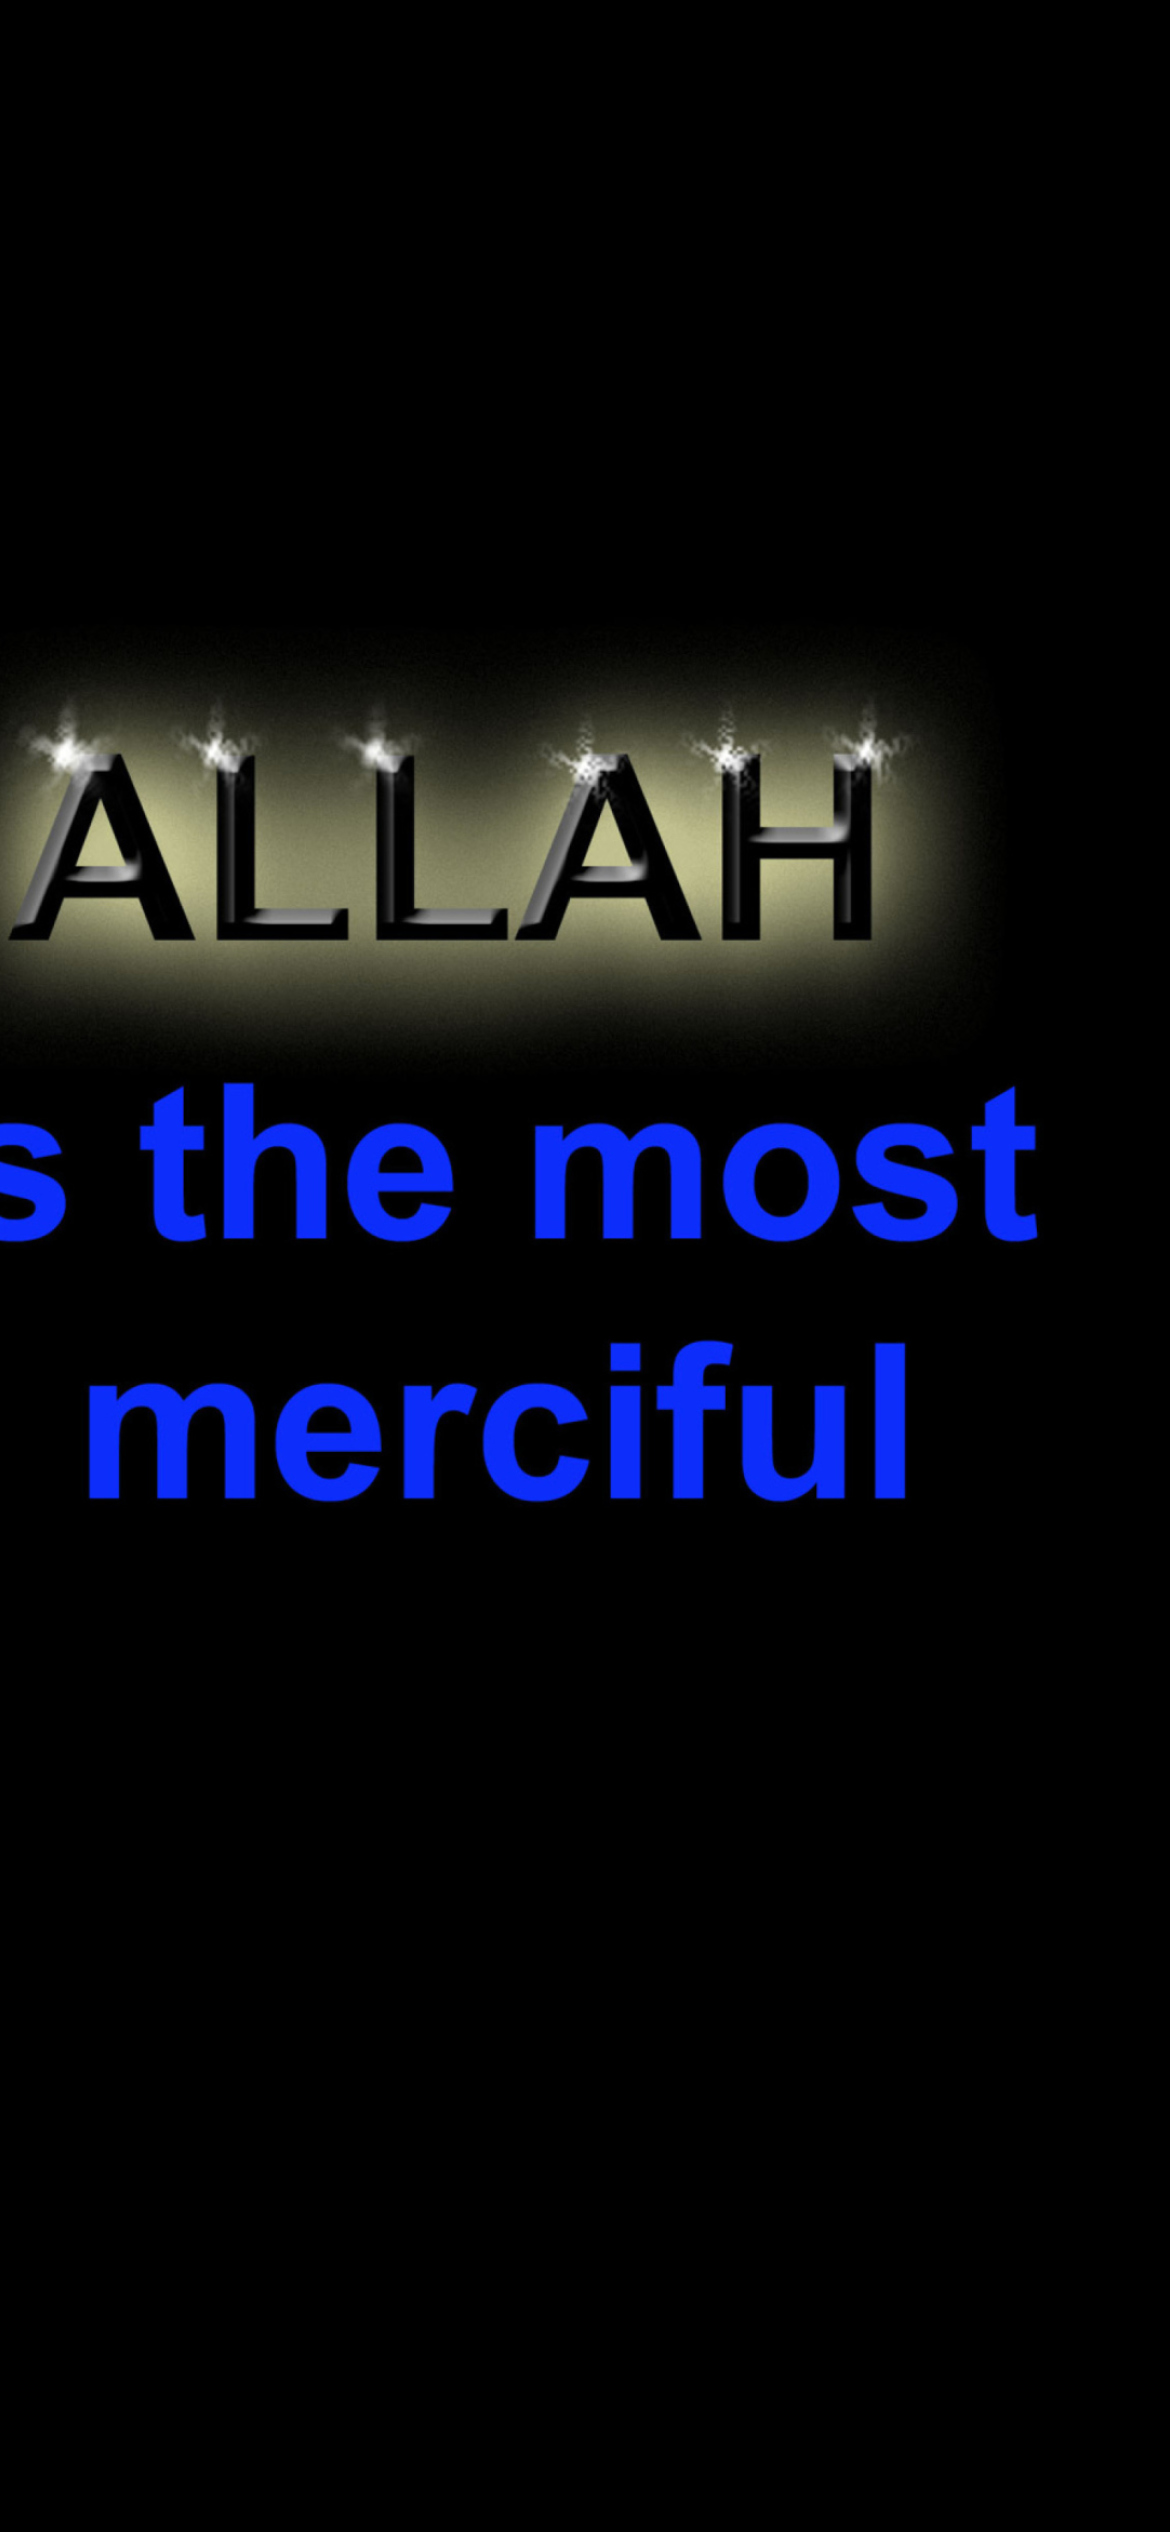 Allah Is The Most Merciful screenshot #1 1170x2532